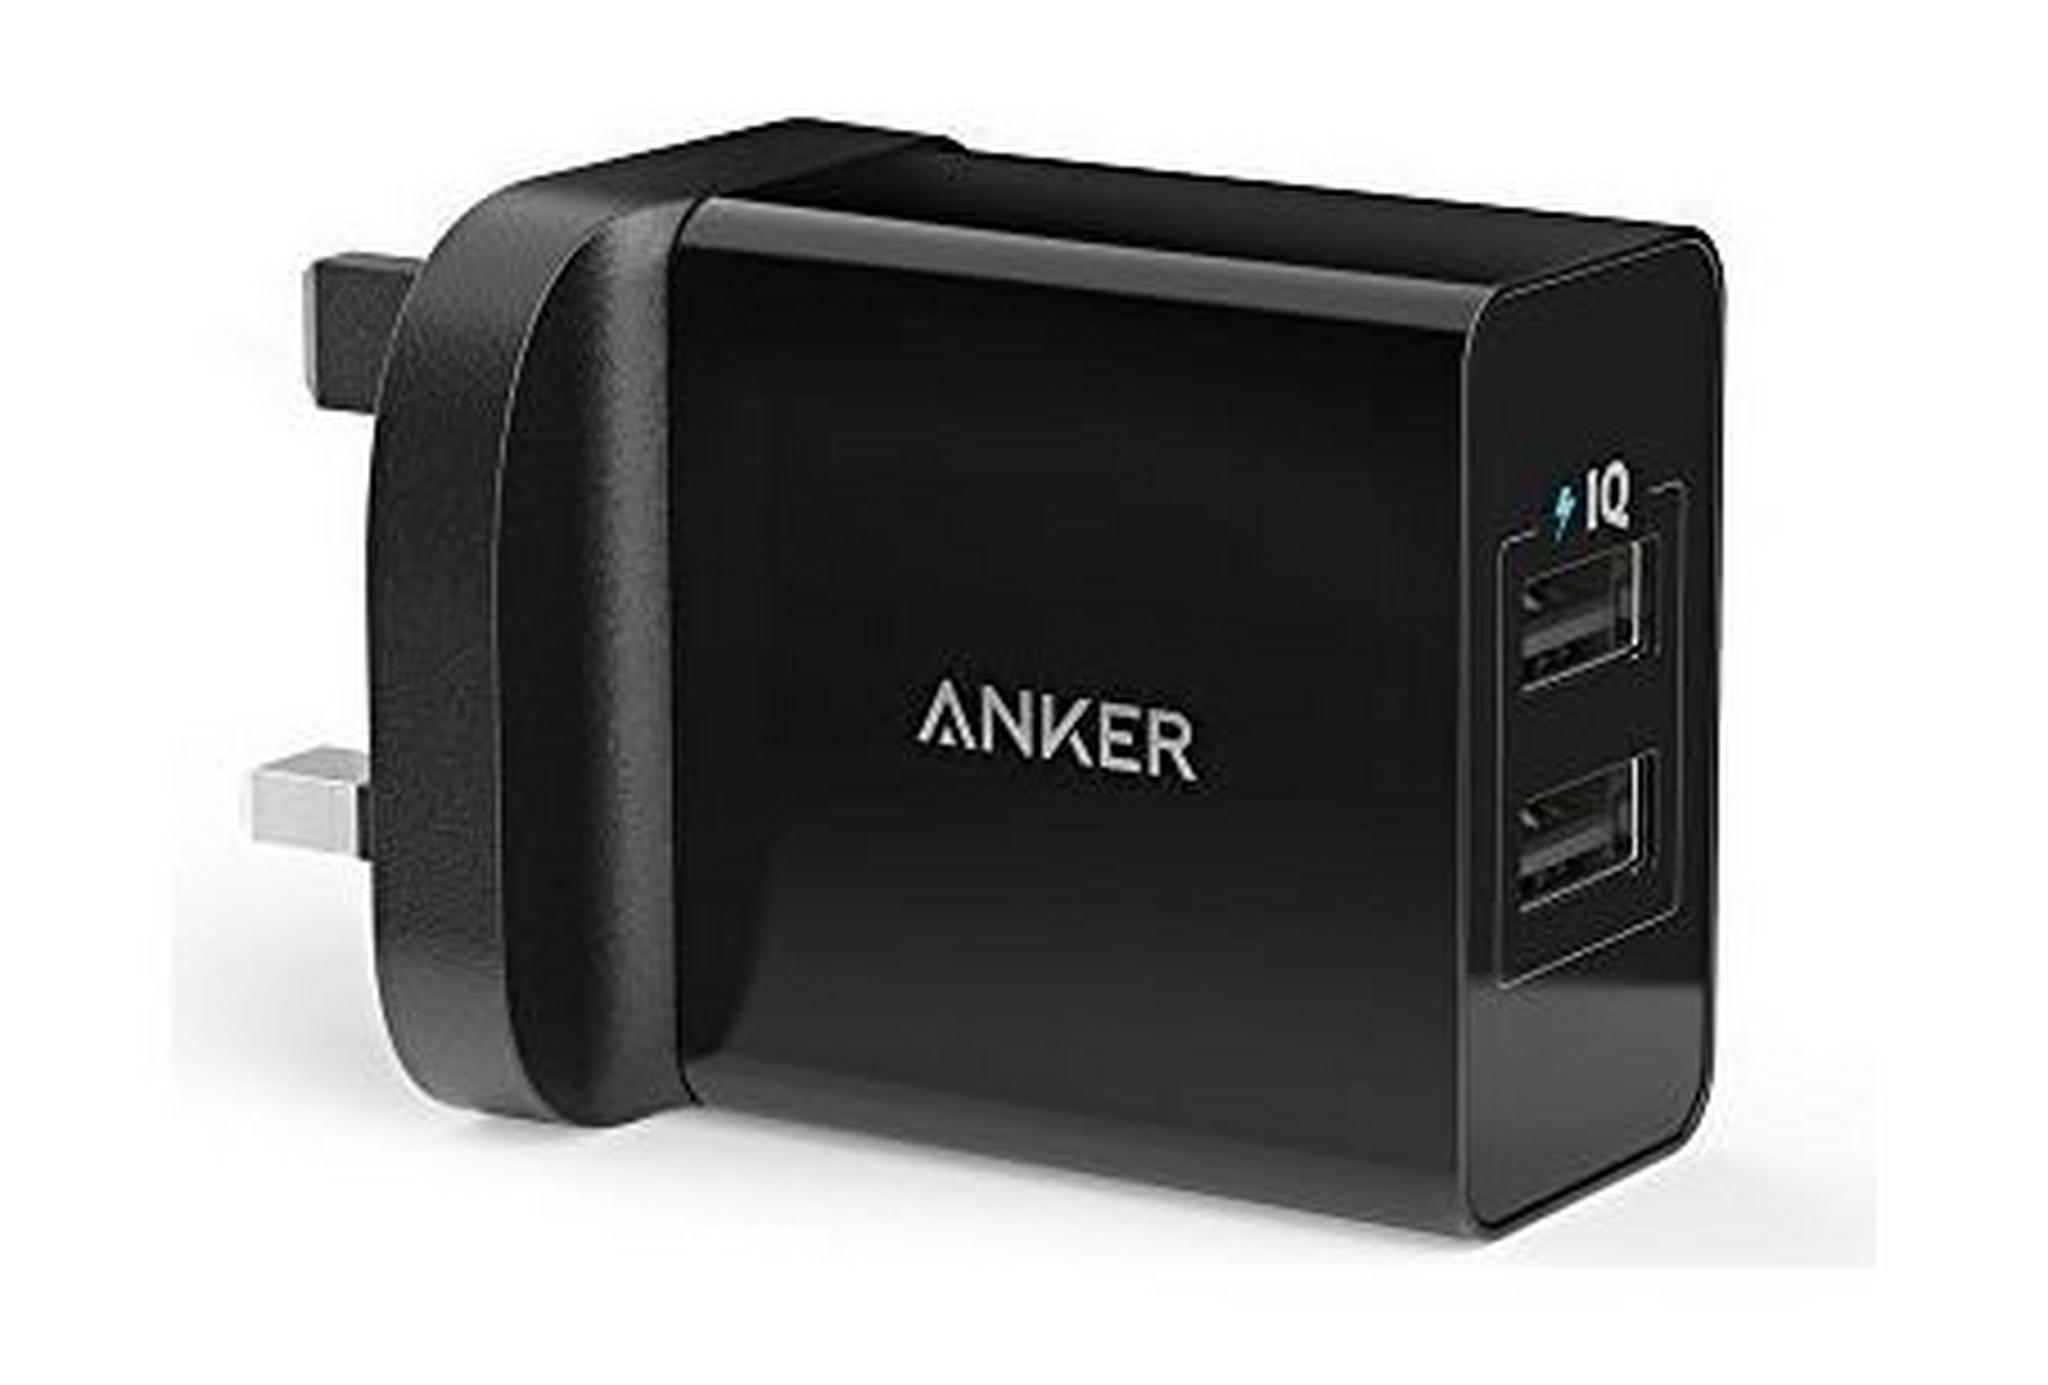 Anker PowerPort 2 Ports Wall Charger - Black